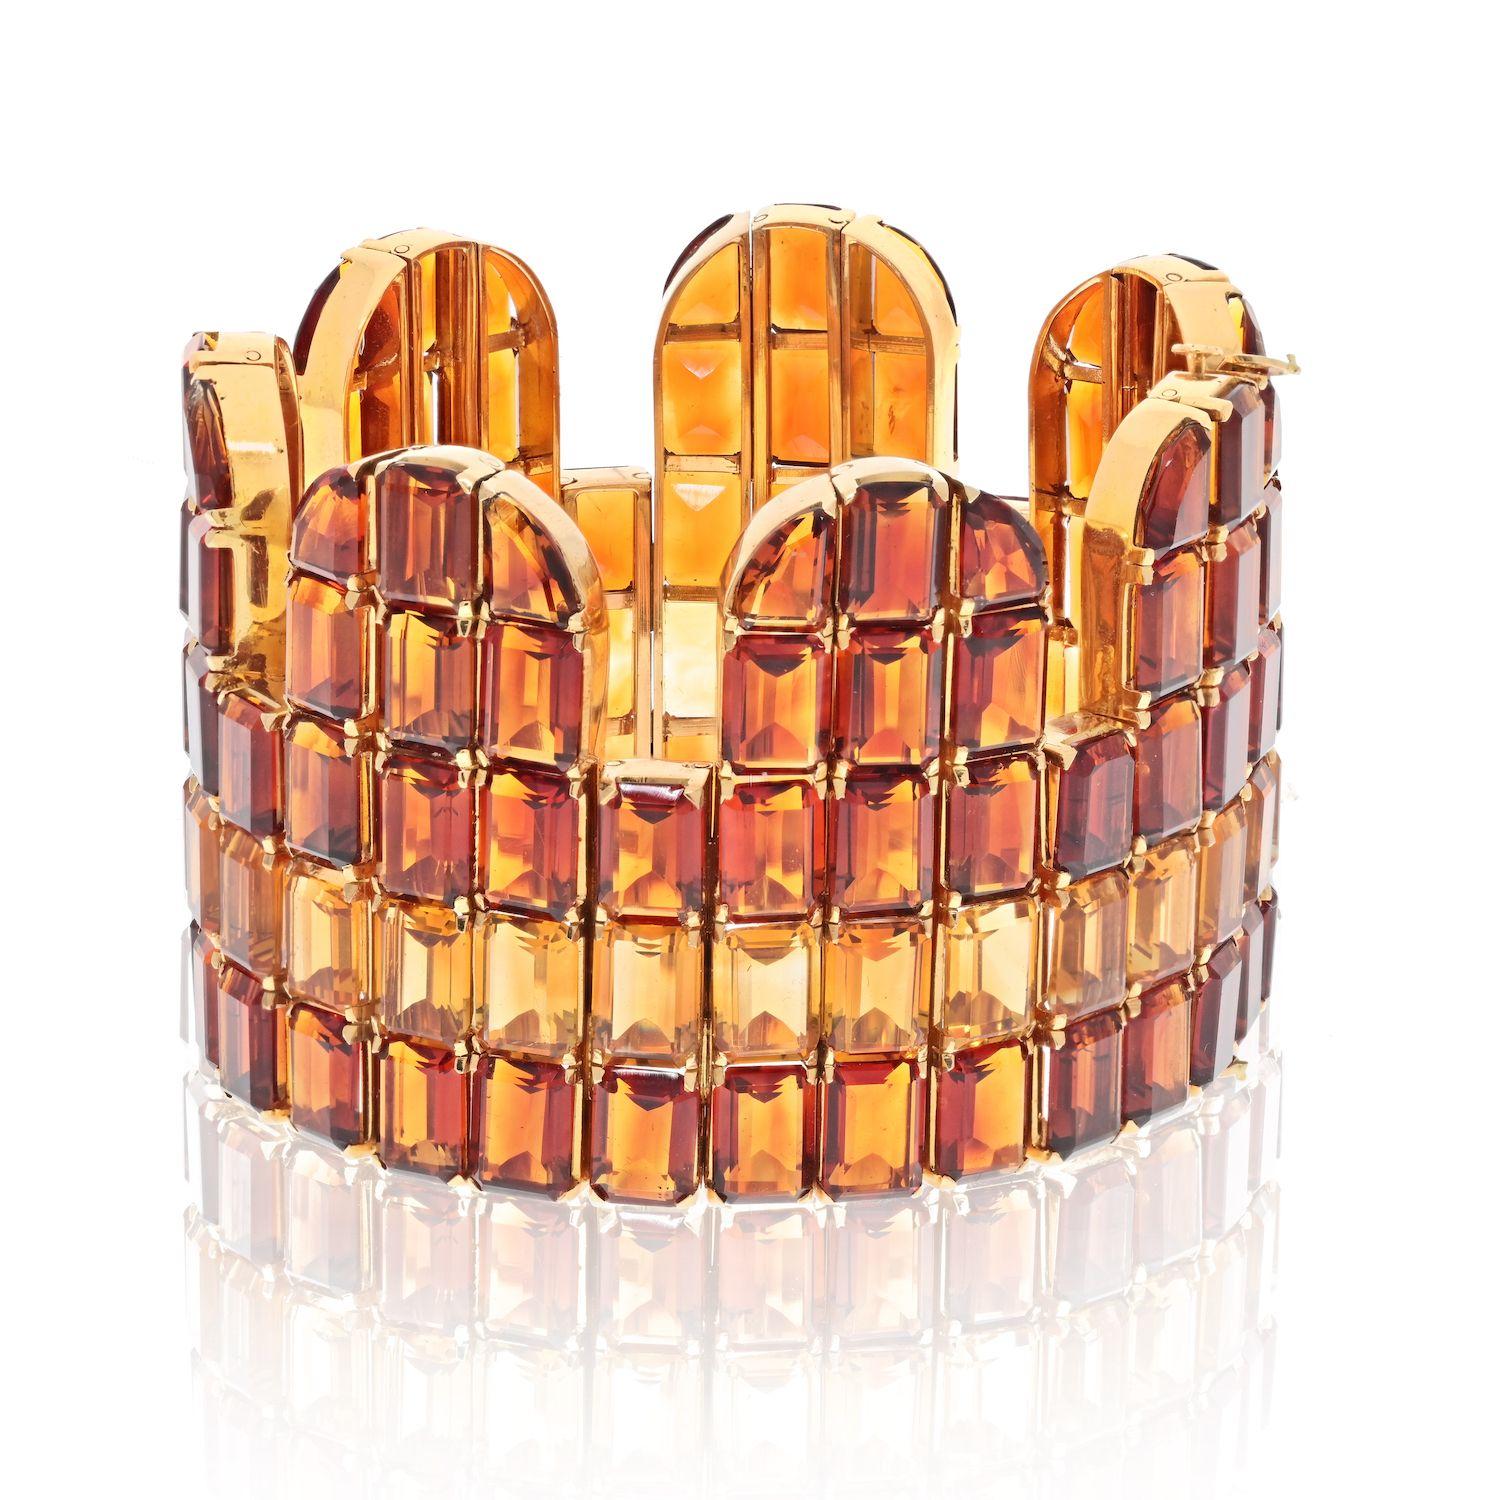 The natural 18K yellow gold citrine and topaz multi-row bracelet is a stunning piece of jewelry that is sure to turn heads. Crafted from high-quality 18-karat yellow gold, the bracelet features several rows of beautiful citrine and topaz gemstones